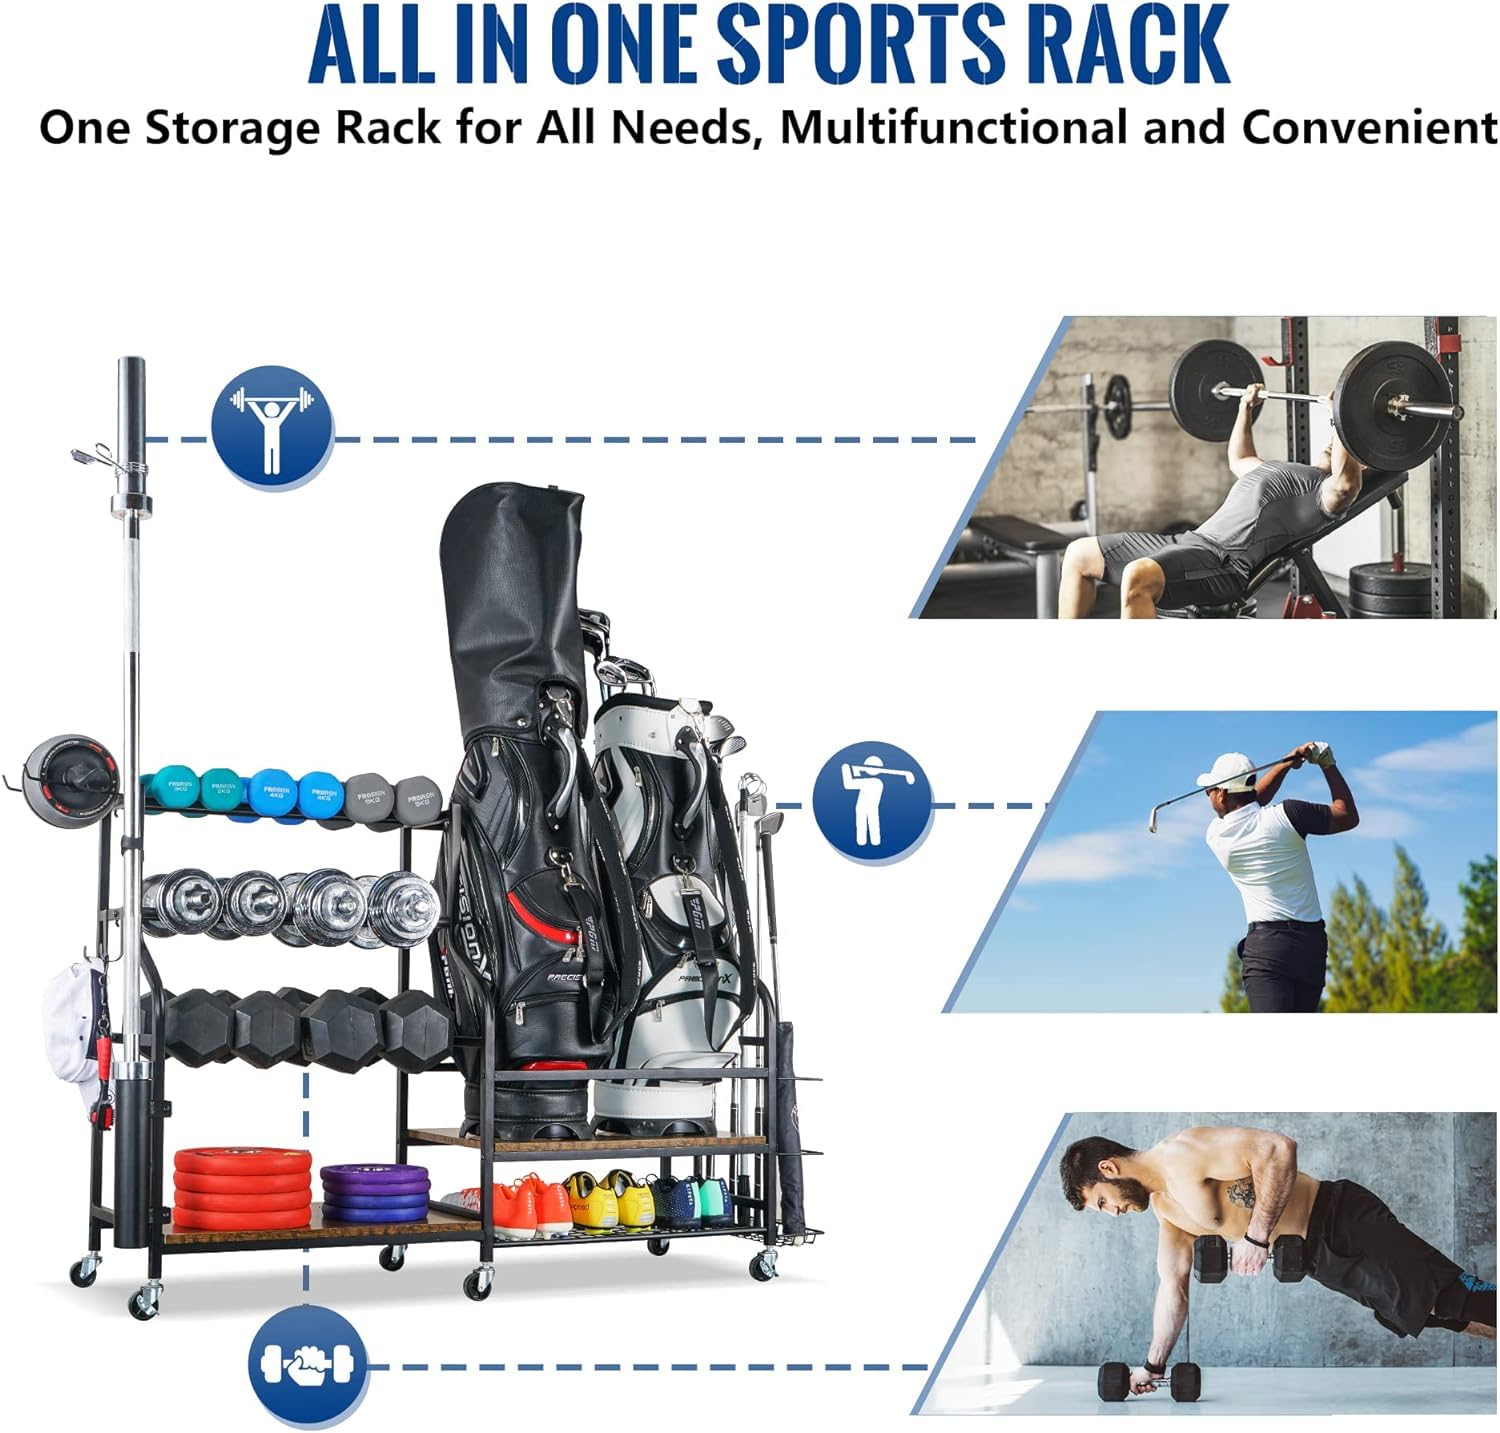 PLKOW Dumbbell Rack, Weight Rack for Dumbbells, Home Gym Storage for  Dumbbells Kettlebells Yoga Mat and Balls, All in One Workout Storage with  Wheels